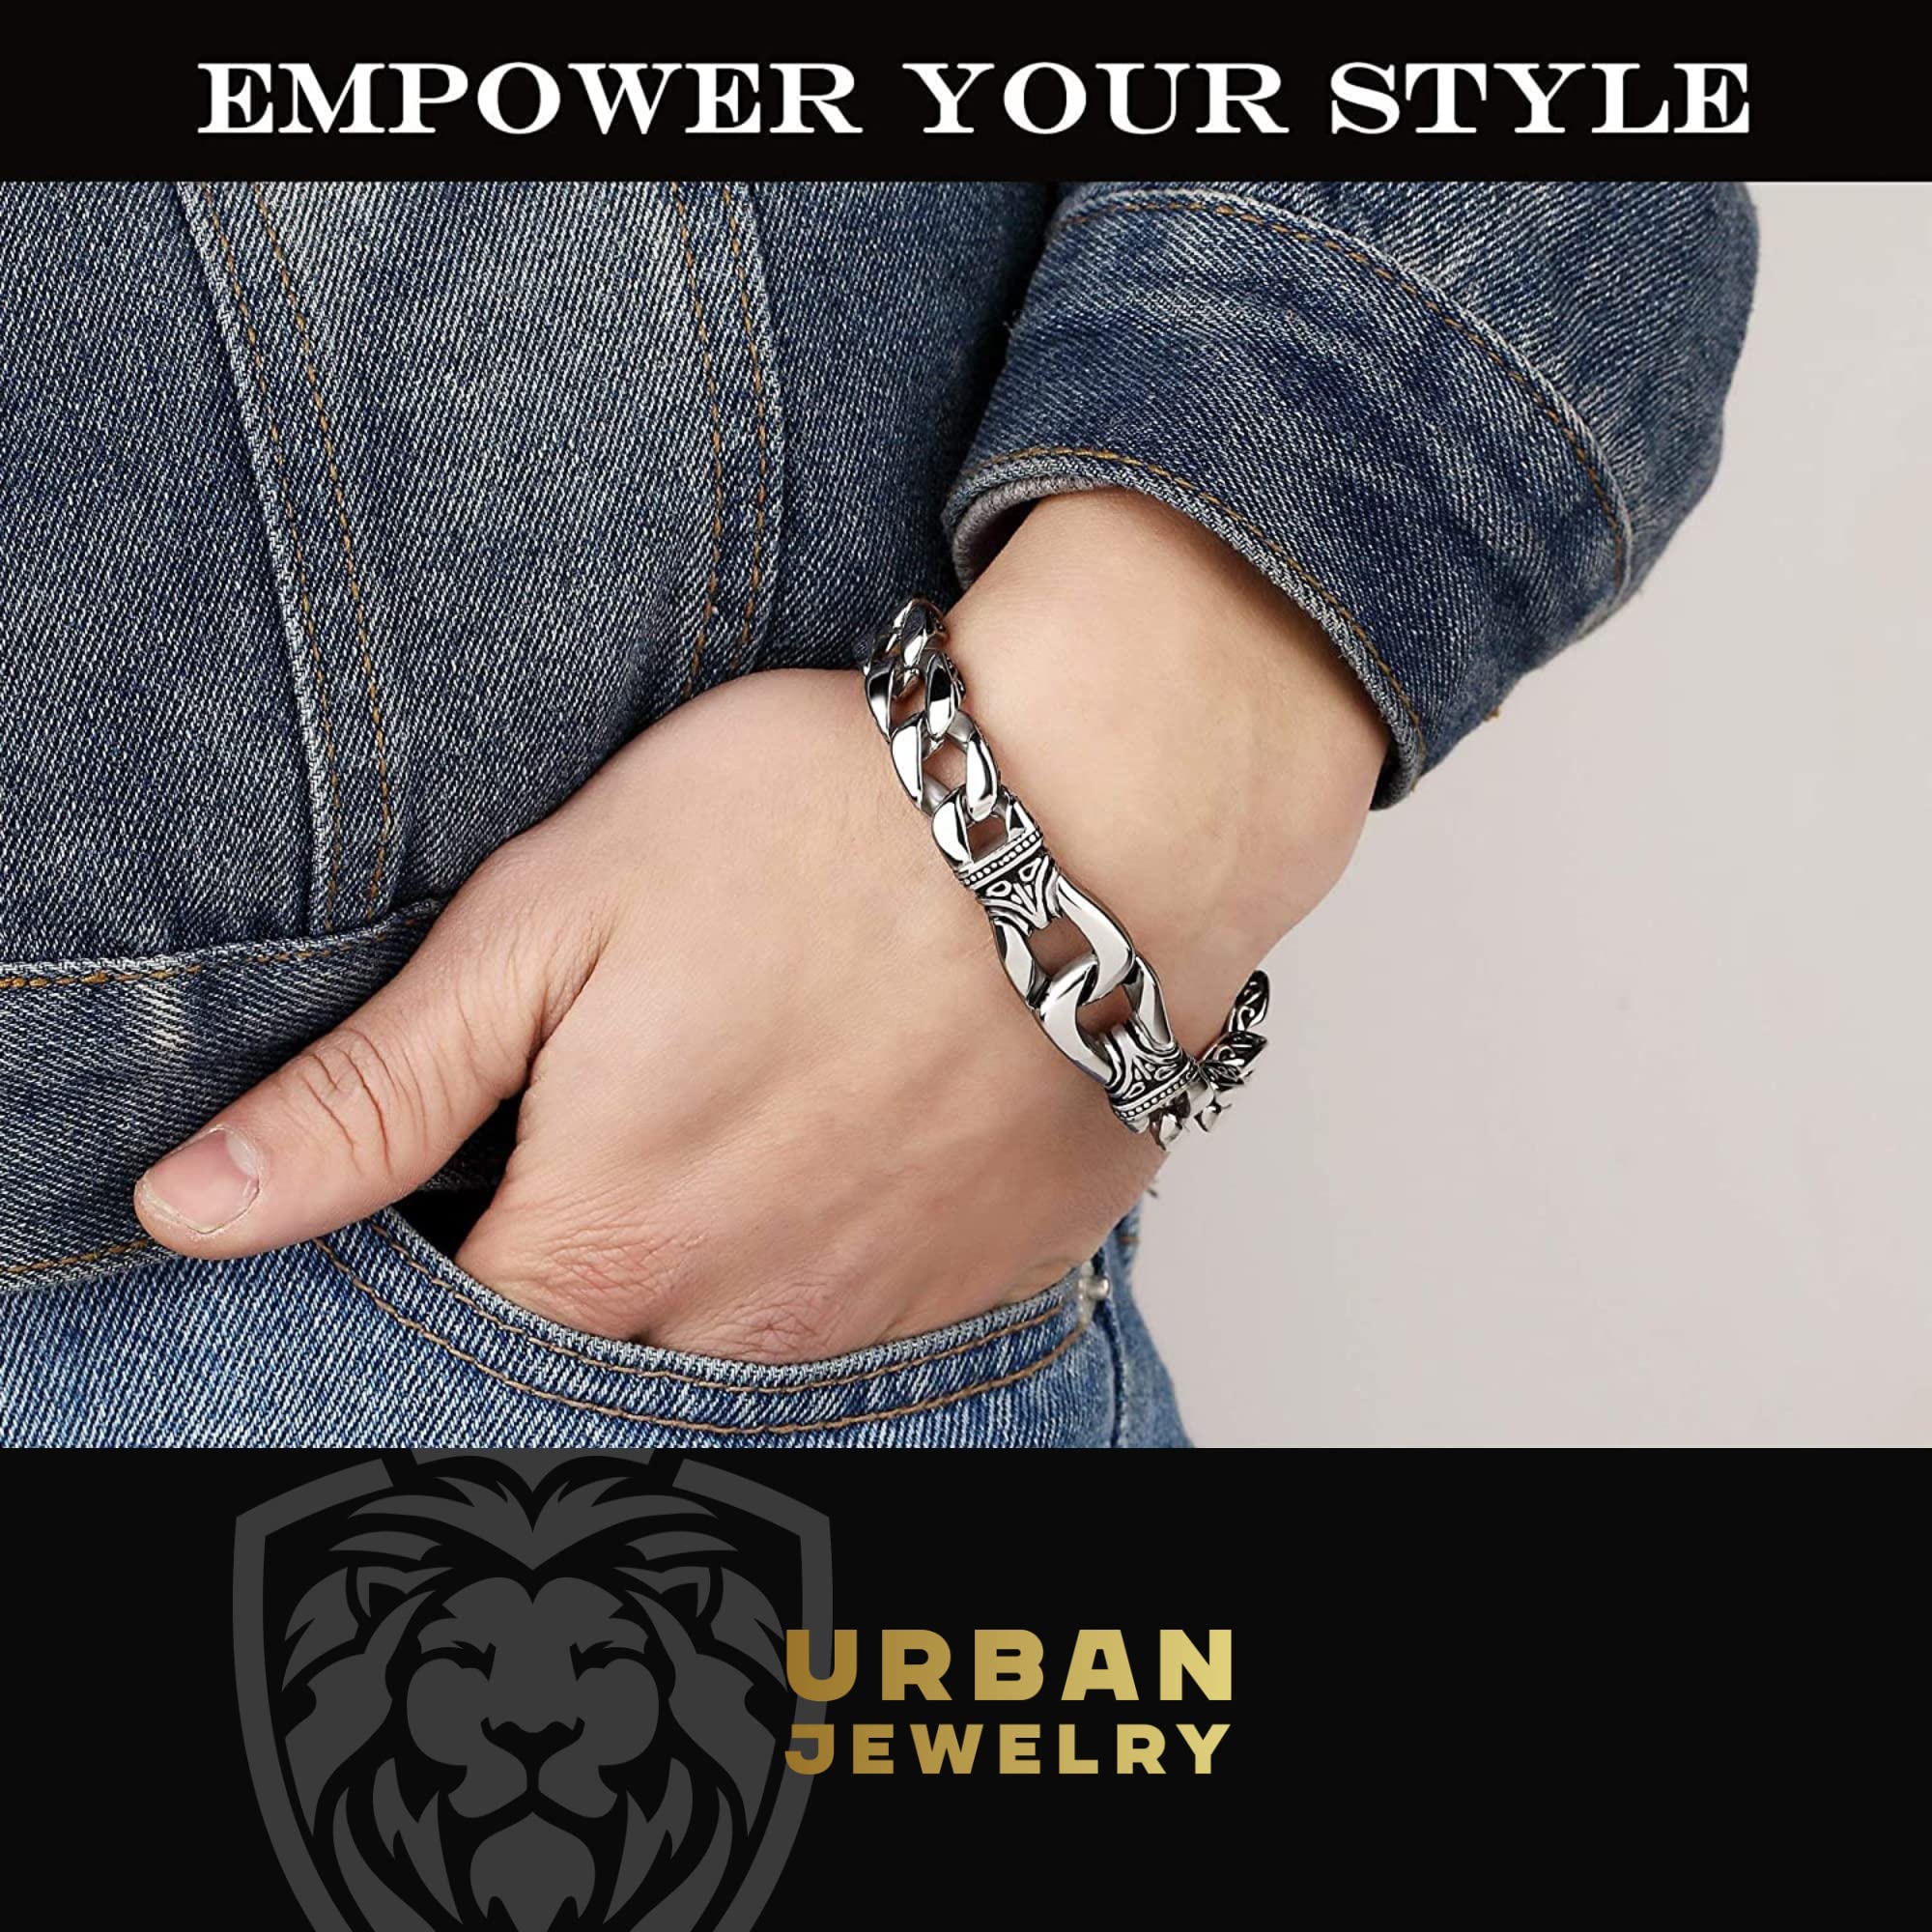 URBAN JEWELRY Amazing Stainless Steel Men's link Bracelet Silver Black 9 Inch with Necklace Option 21 inch (With Branded Gift Box)